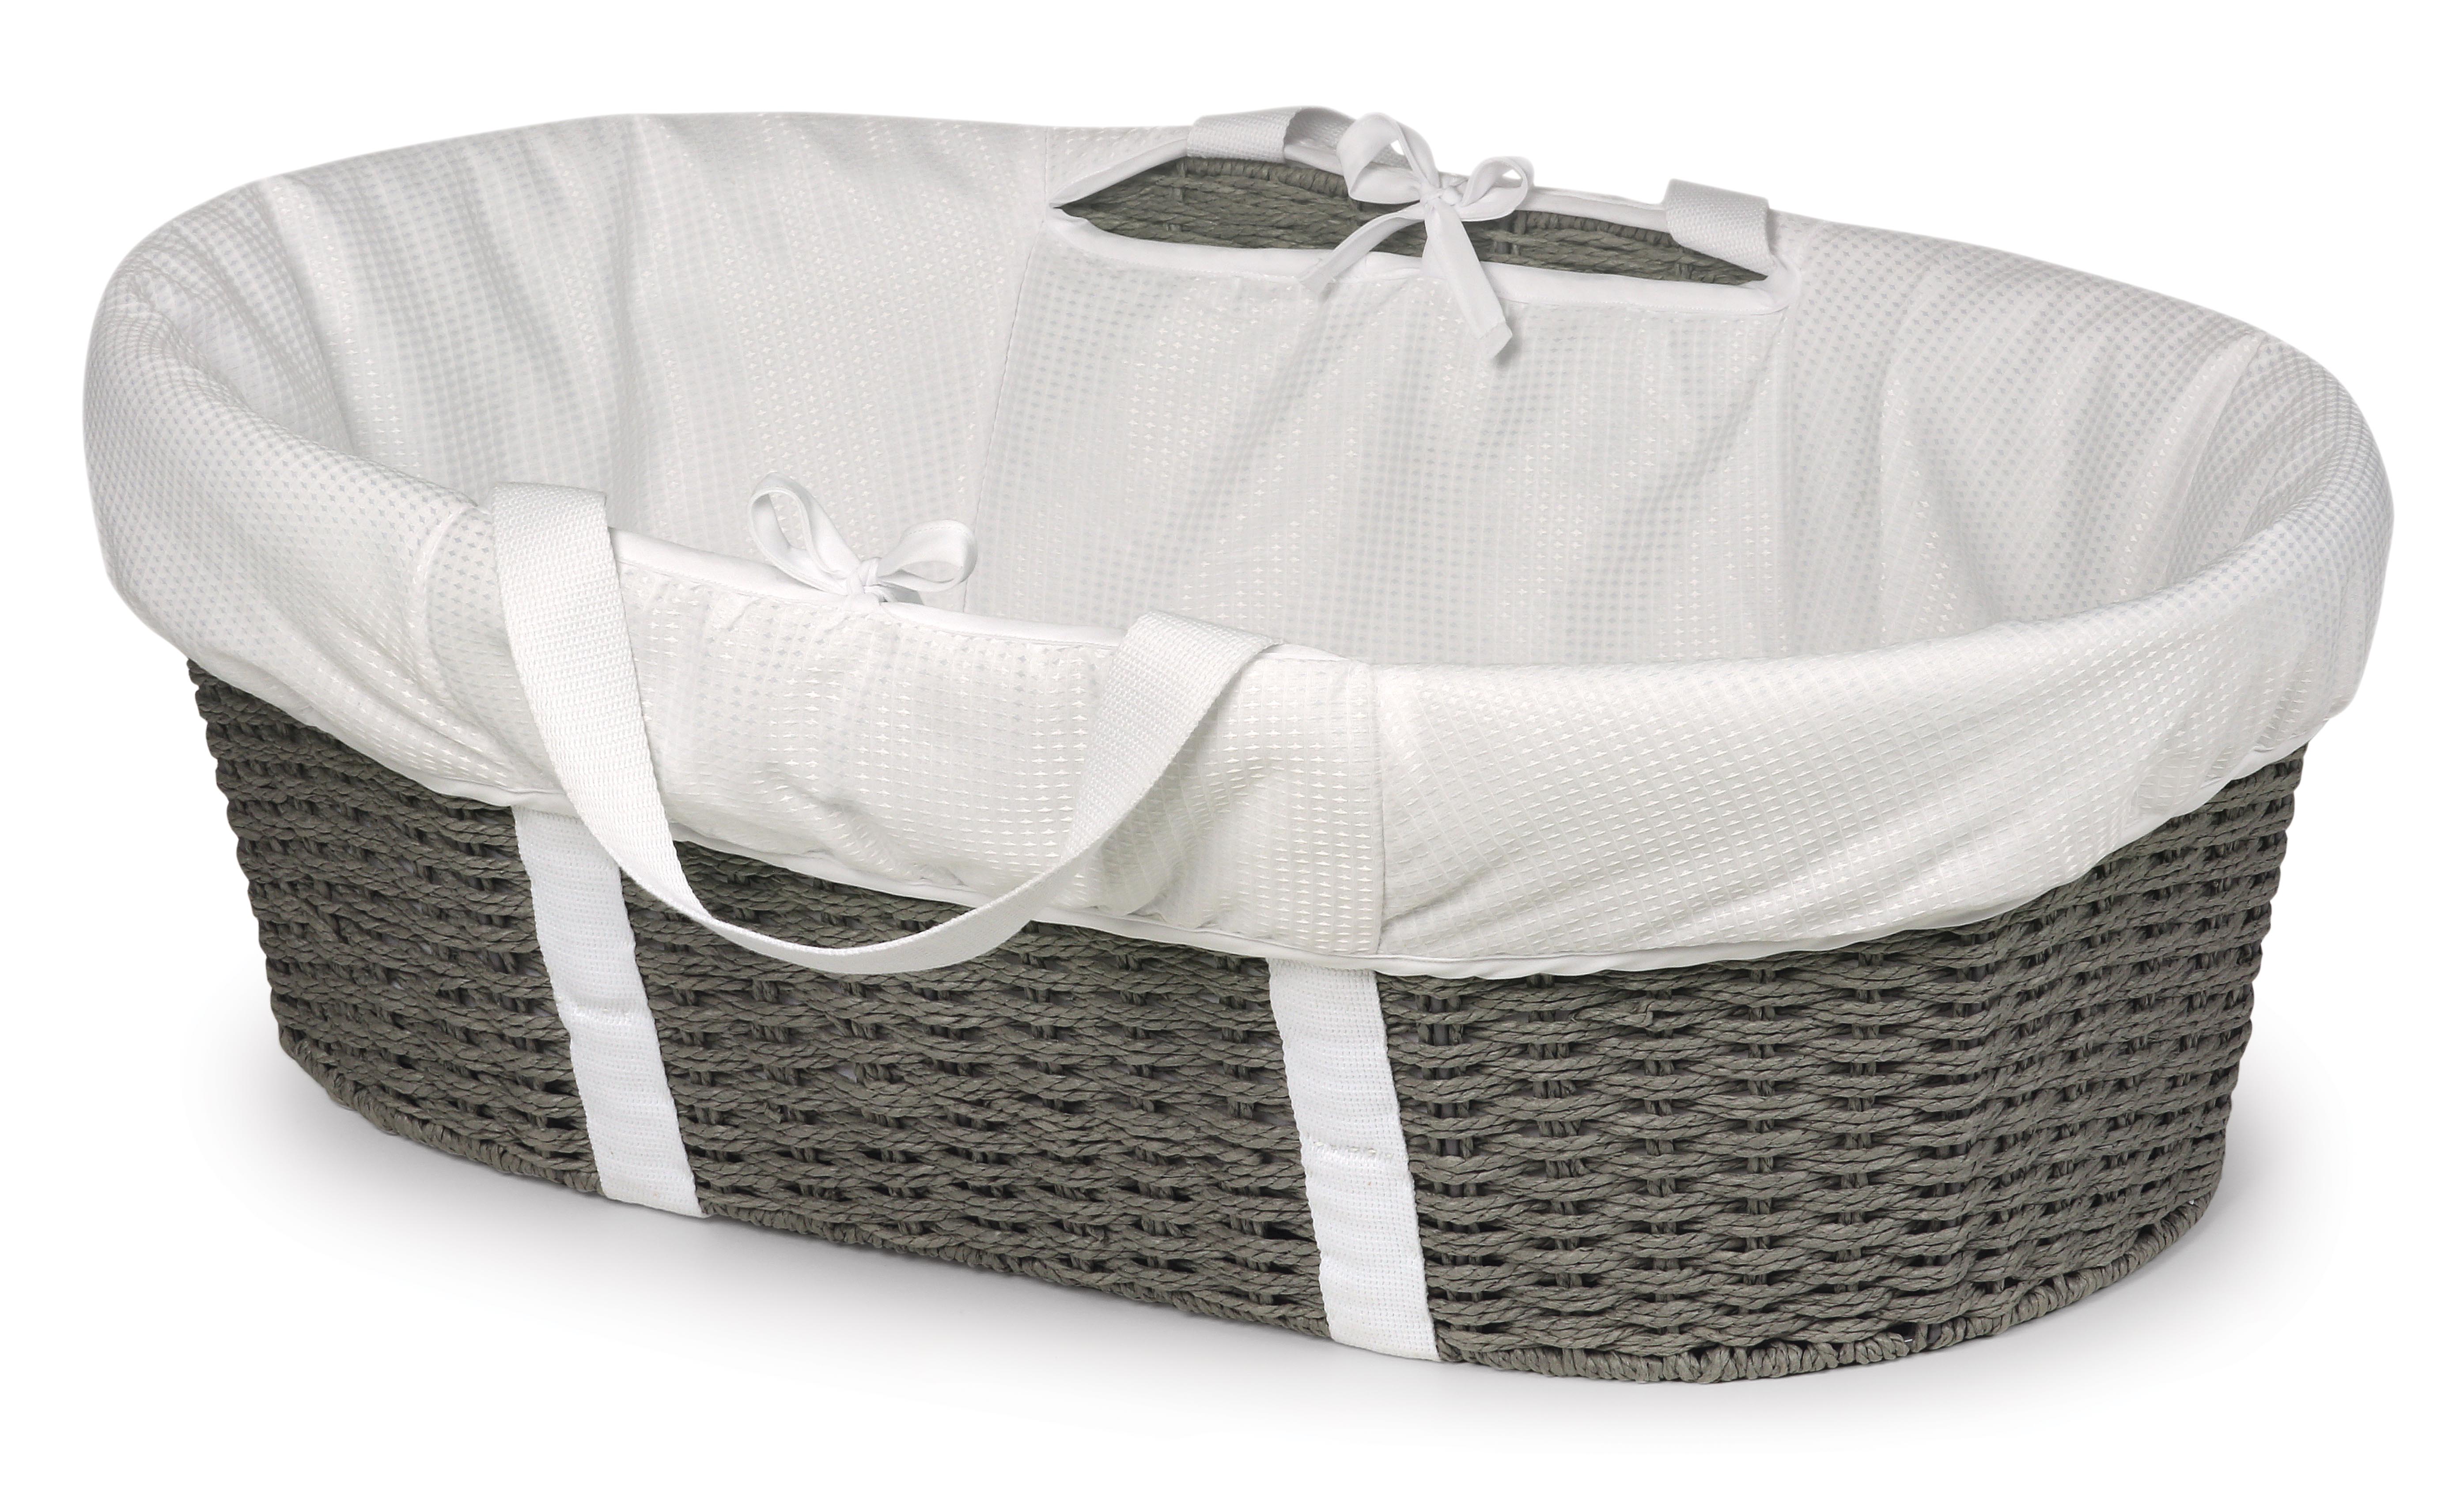 Wicker-Look Woven Baby Moses Changing Basket - Gray/White